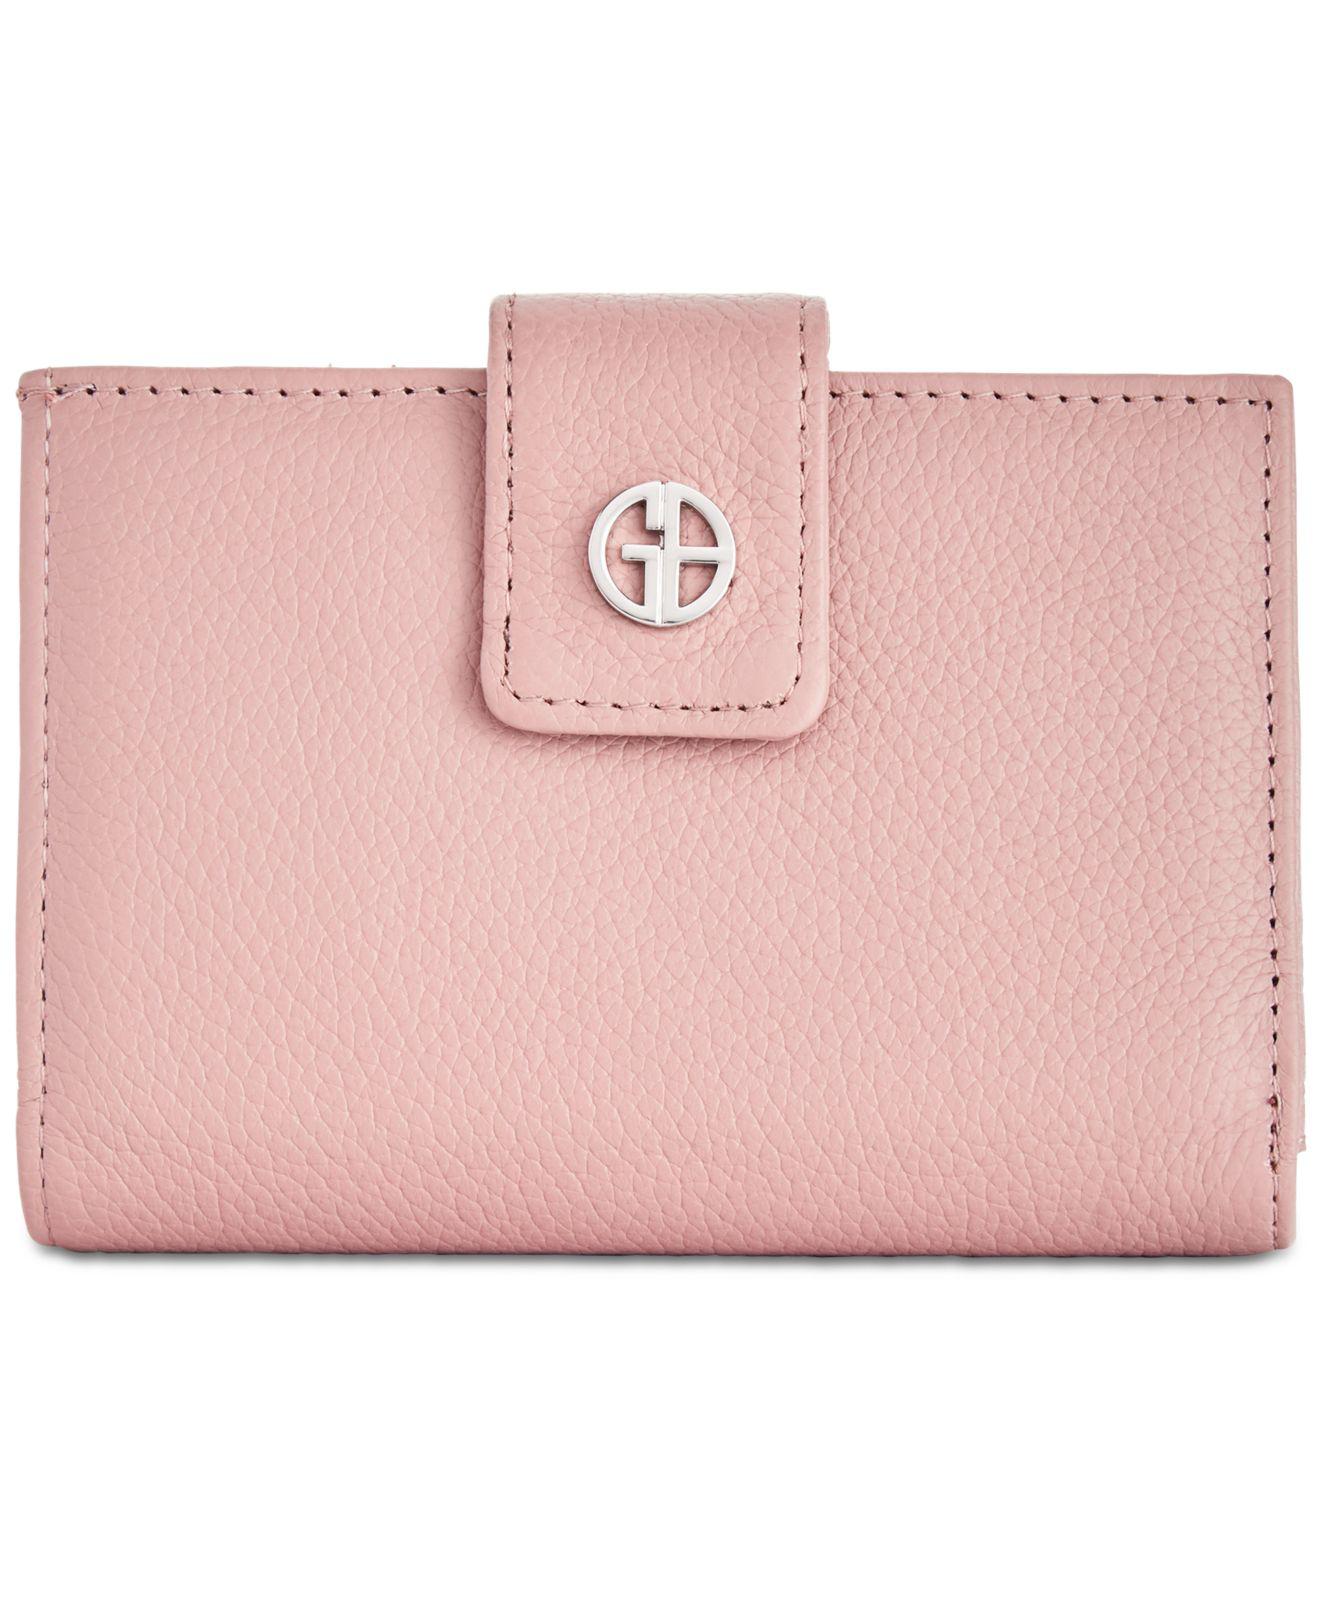 Giani Bernini Framed Indexer Leather Wallet, Created For Macy's in Rose ...